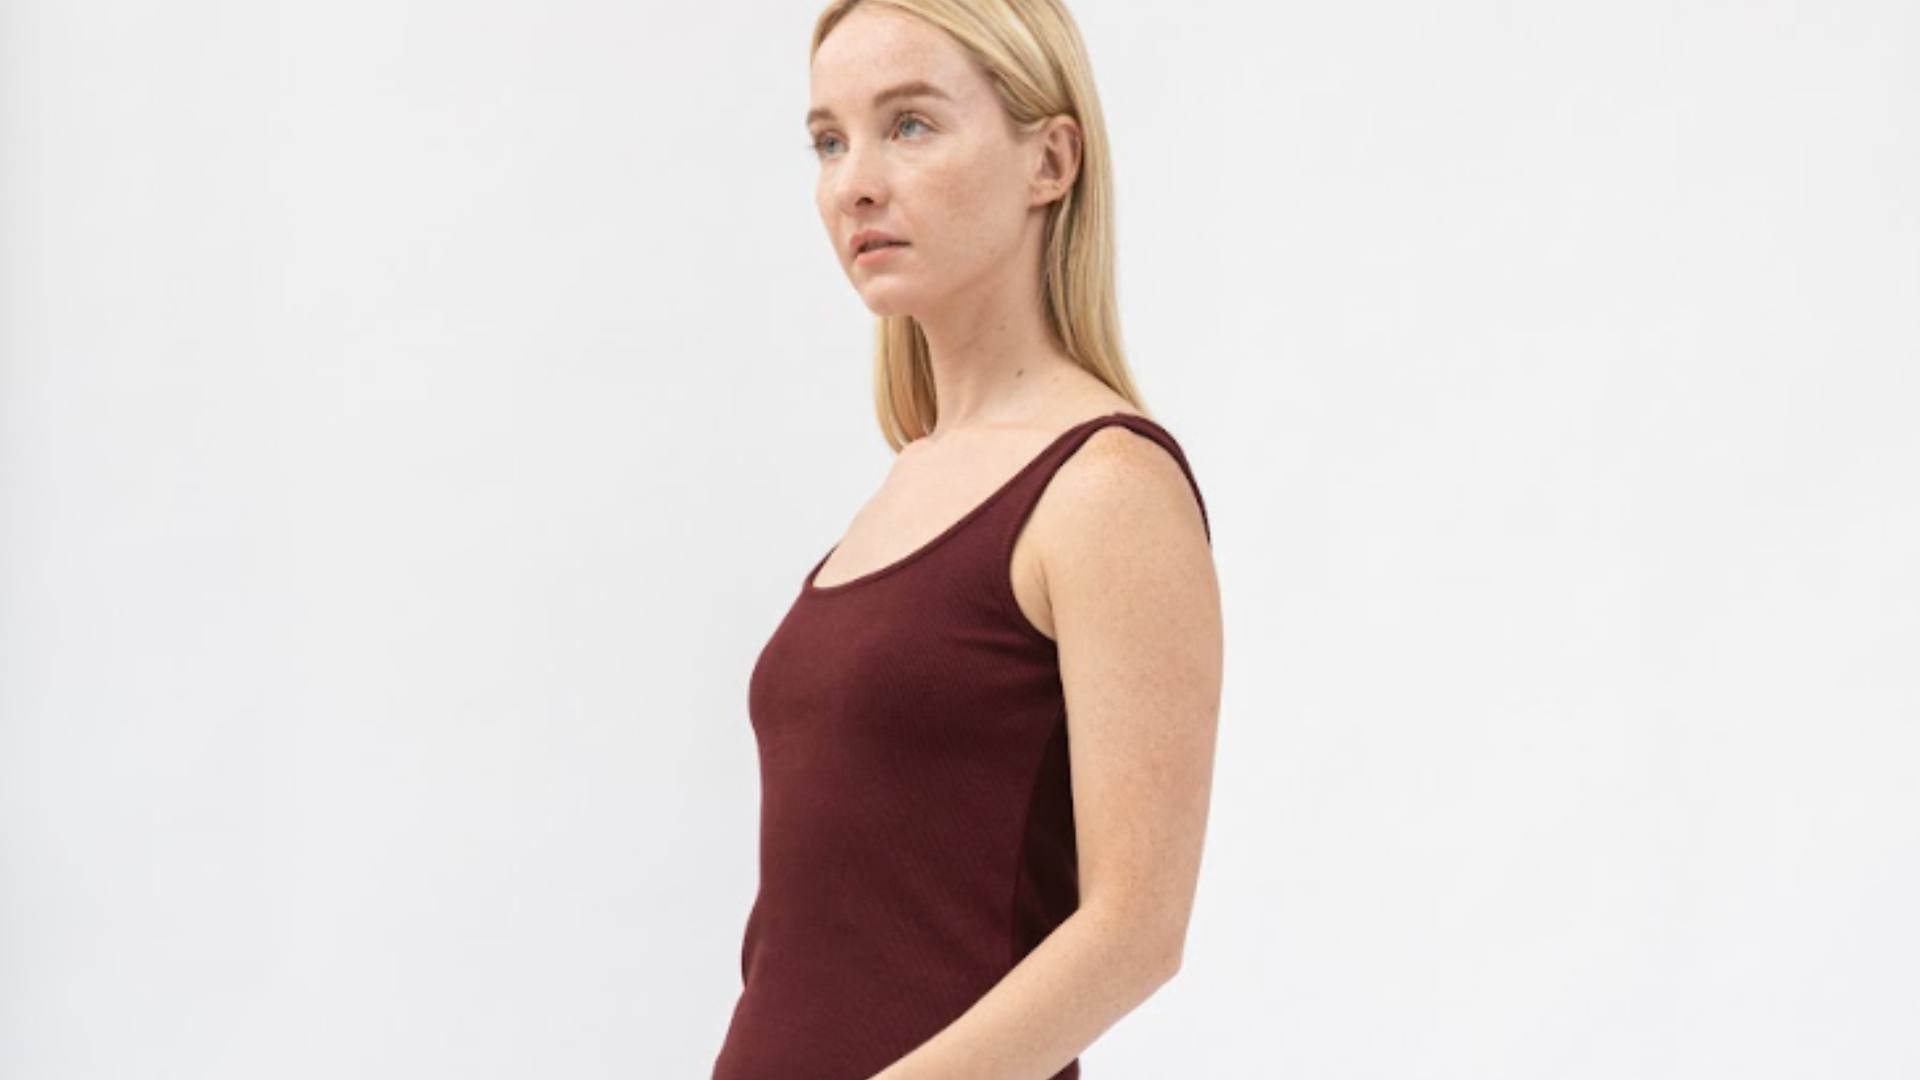 A blonde woman stands wearing a burgundy tank top, demonstrating sustainable clothing styles.